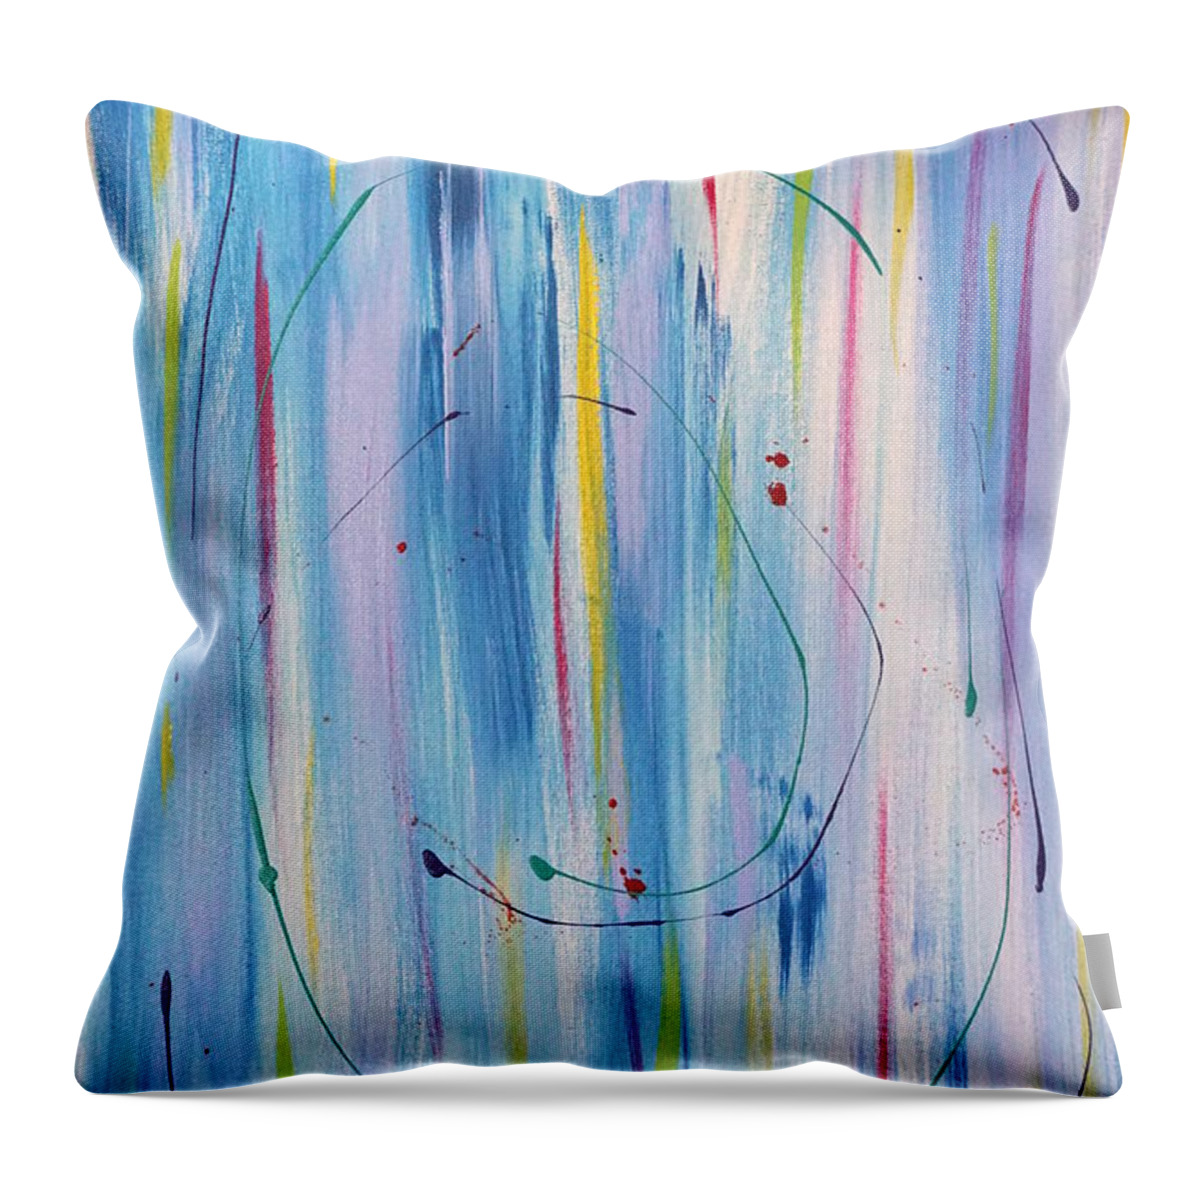 Rain Dance Throw Pillow featuring the painting Ran Dance by Brent Knippel